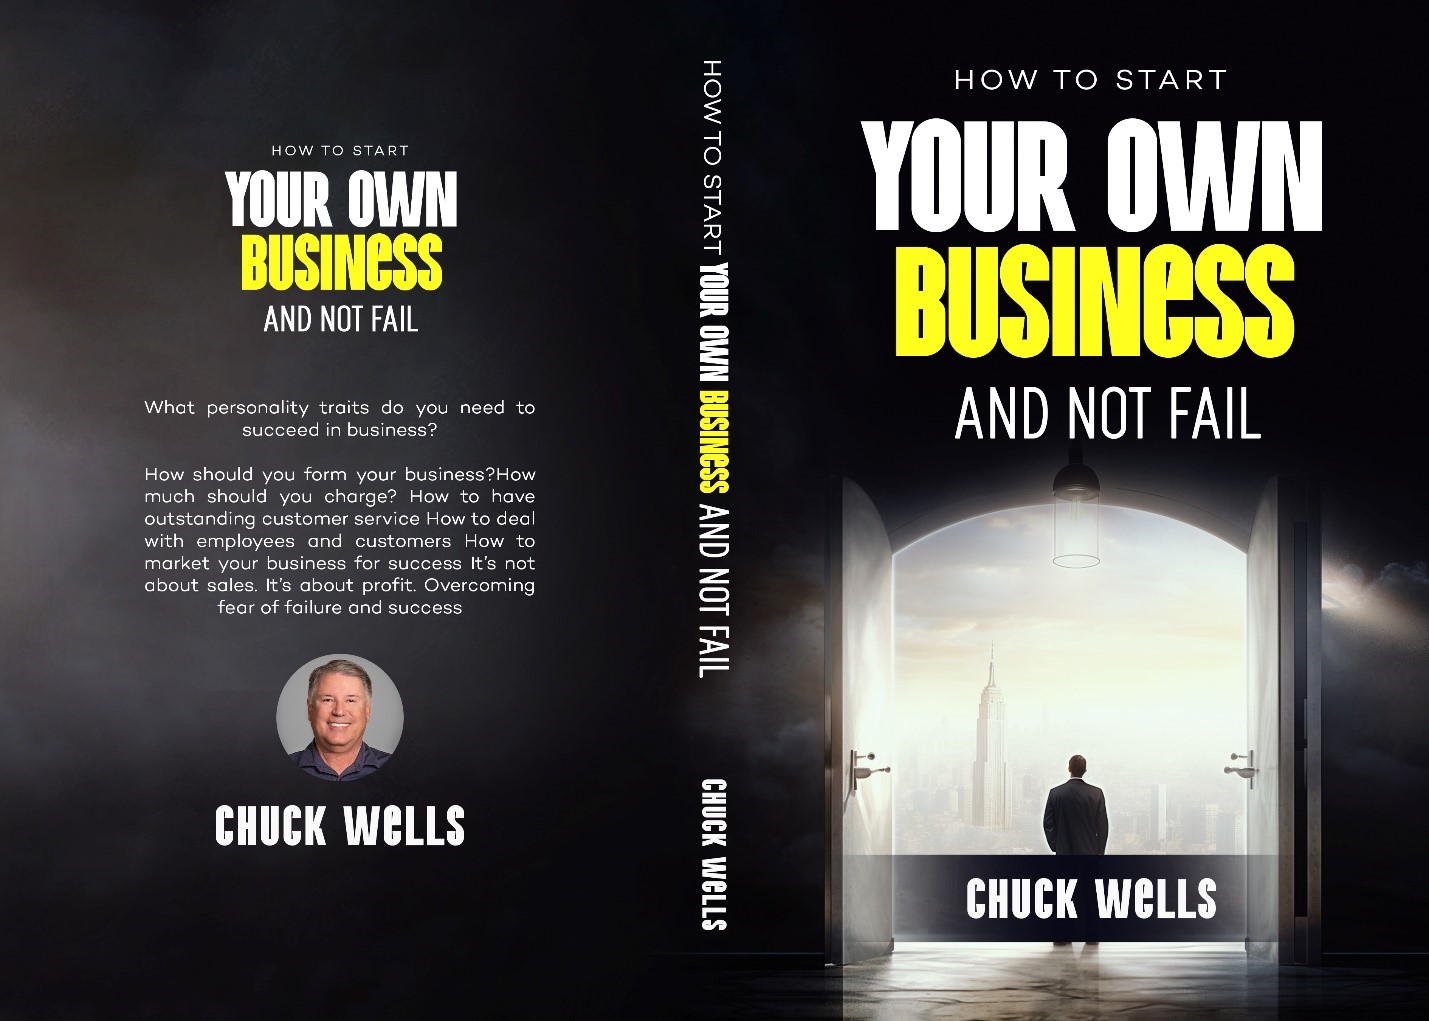 "How to Start Your Own Business and Not Fail" by Chuck Wells: The Ultimate Blueprint for Entrepreneurial Success